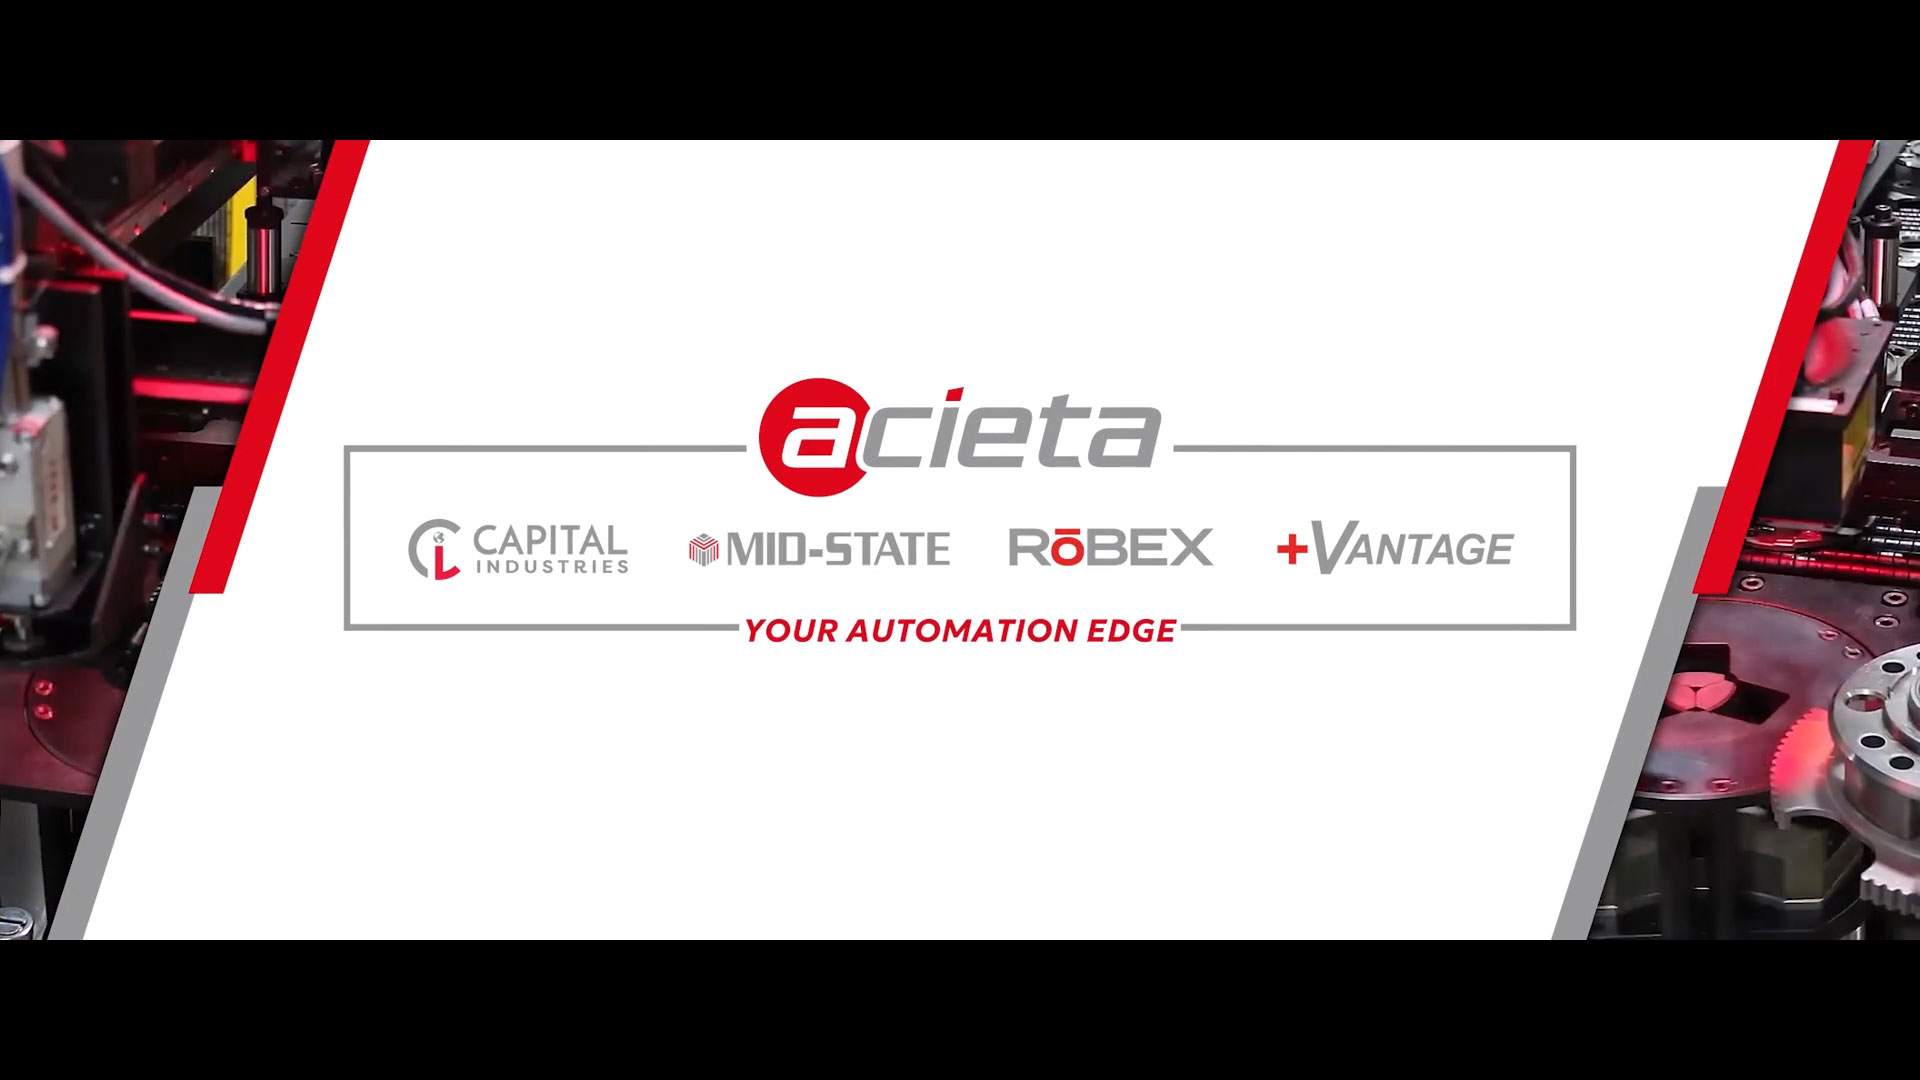 Acieta, Capital Industries, Mid-State Engineering, RoBEX and +Vantage have united to transform your operations. INNOVATE to get ahead, INTEGRATE for seamless efficiency, and DOMINATE your market. With us, you're not just prepared for the future; you are forging it. Visit acieta.com/edge for more information.